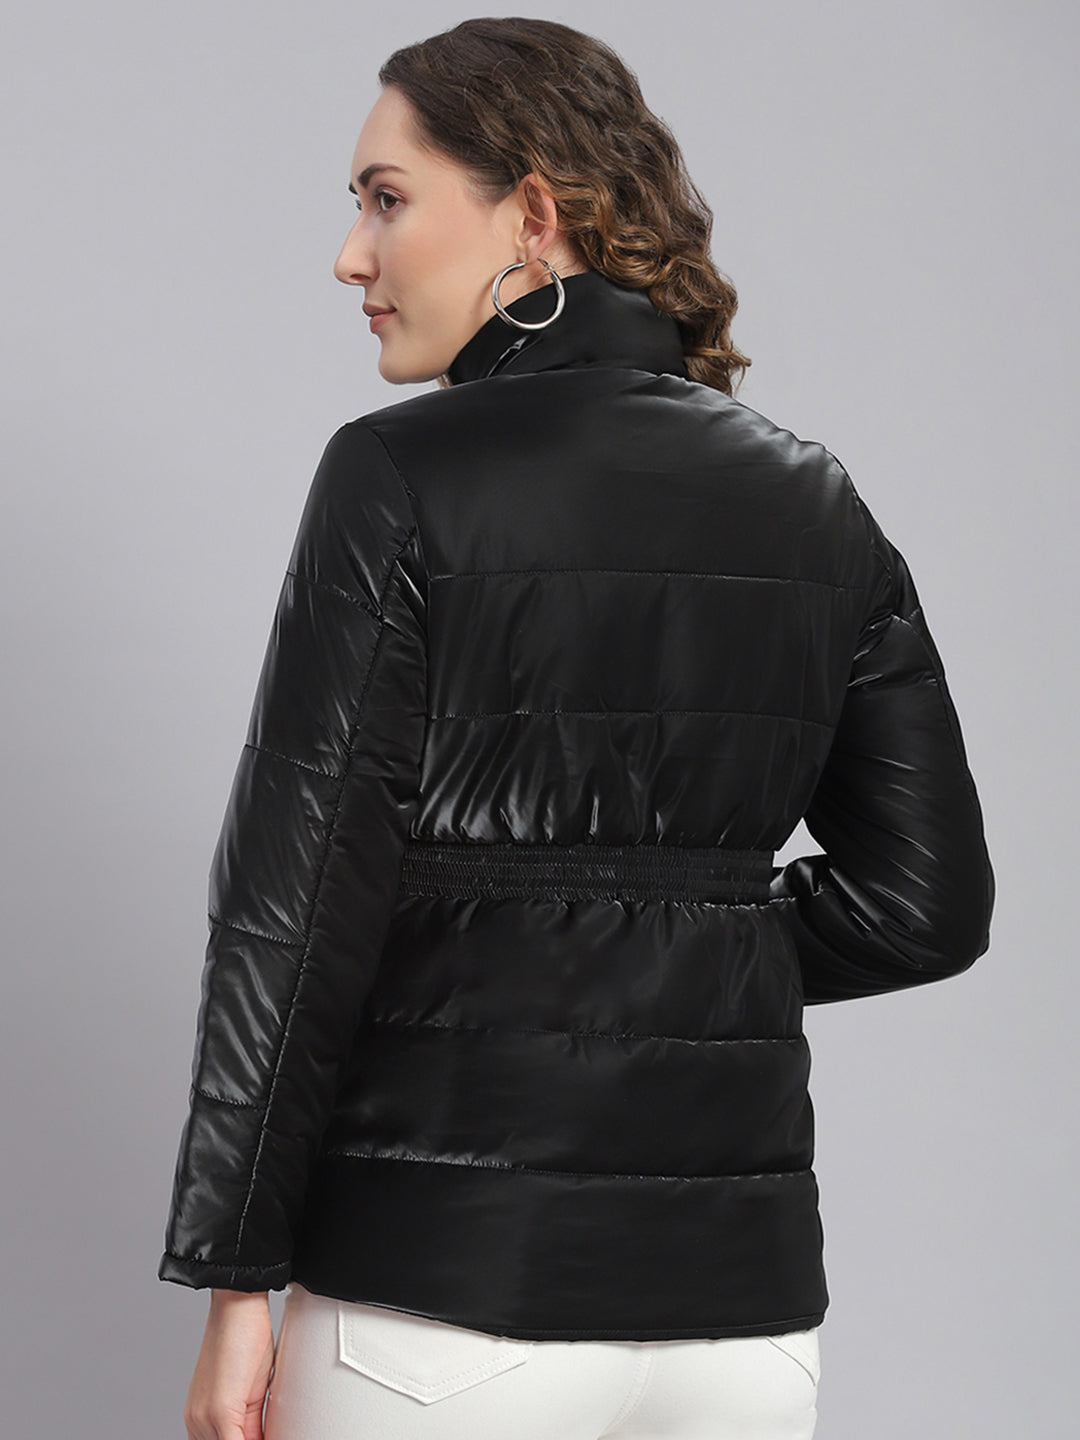 Women Black Solid Stand Collar Full Sleeve Jackets